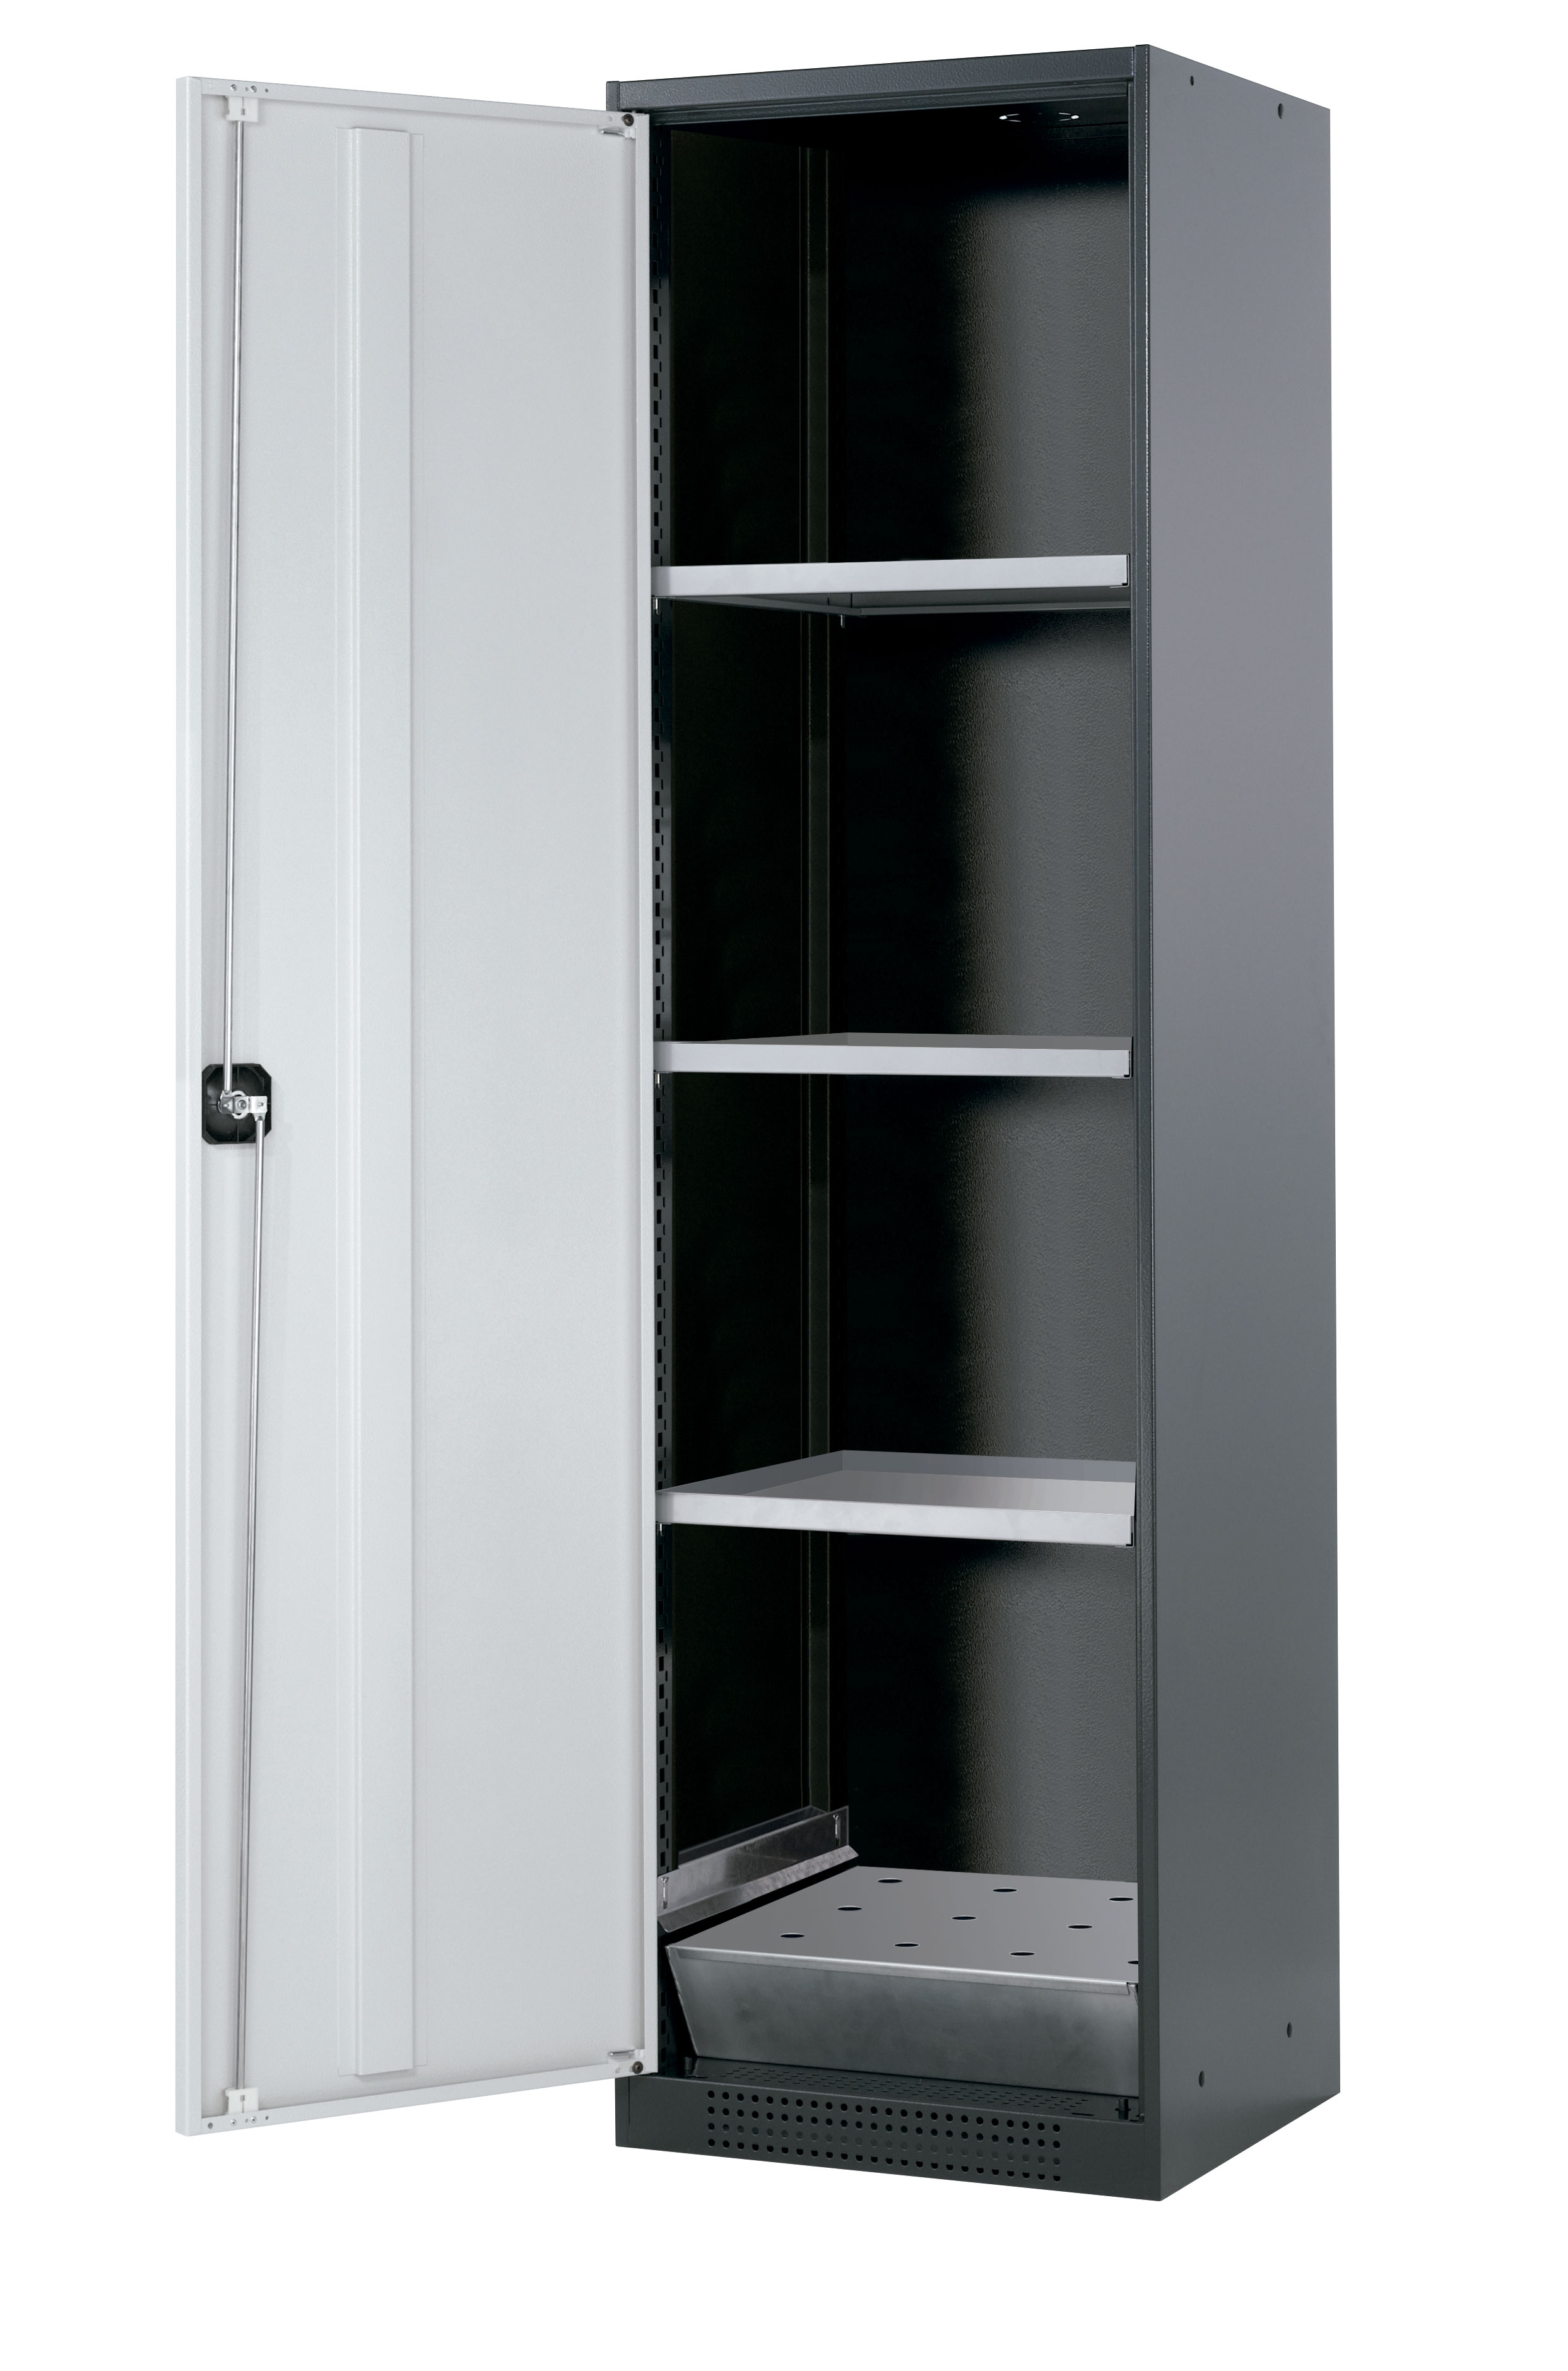 Cabinets for storage of other chemical products and reagents